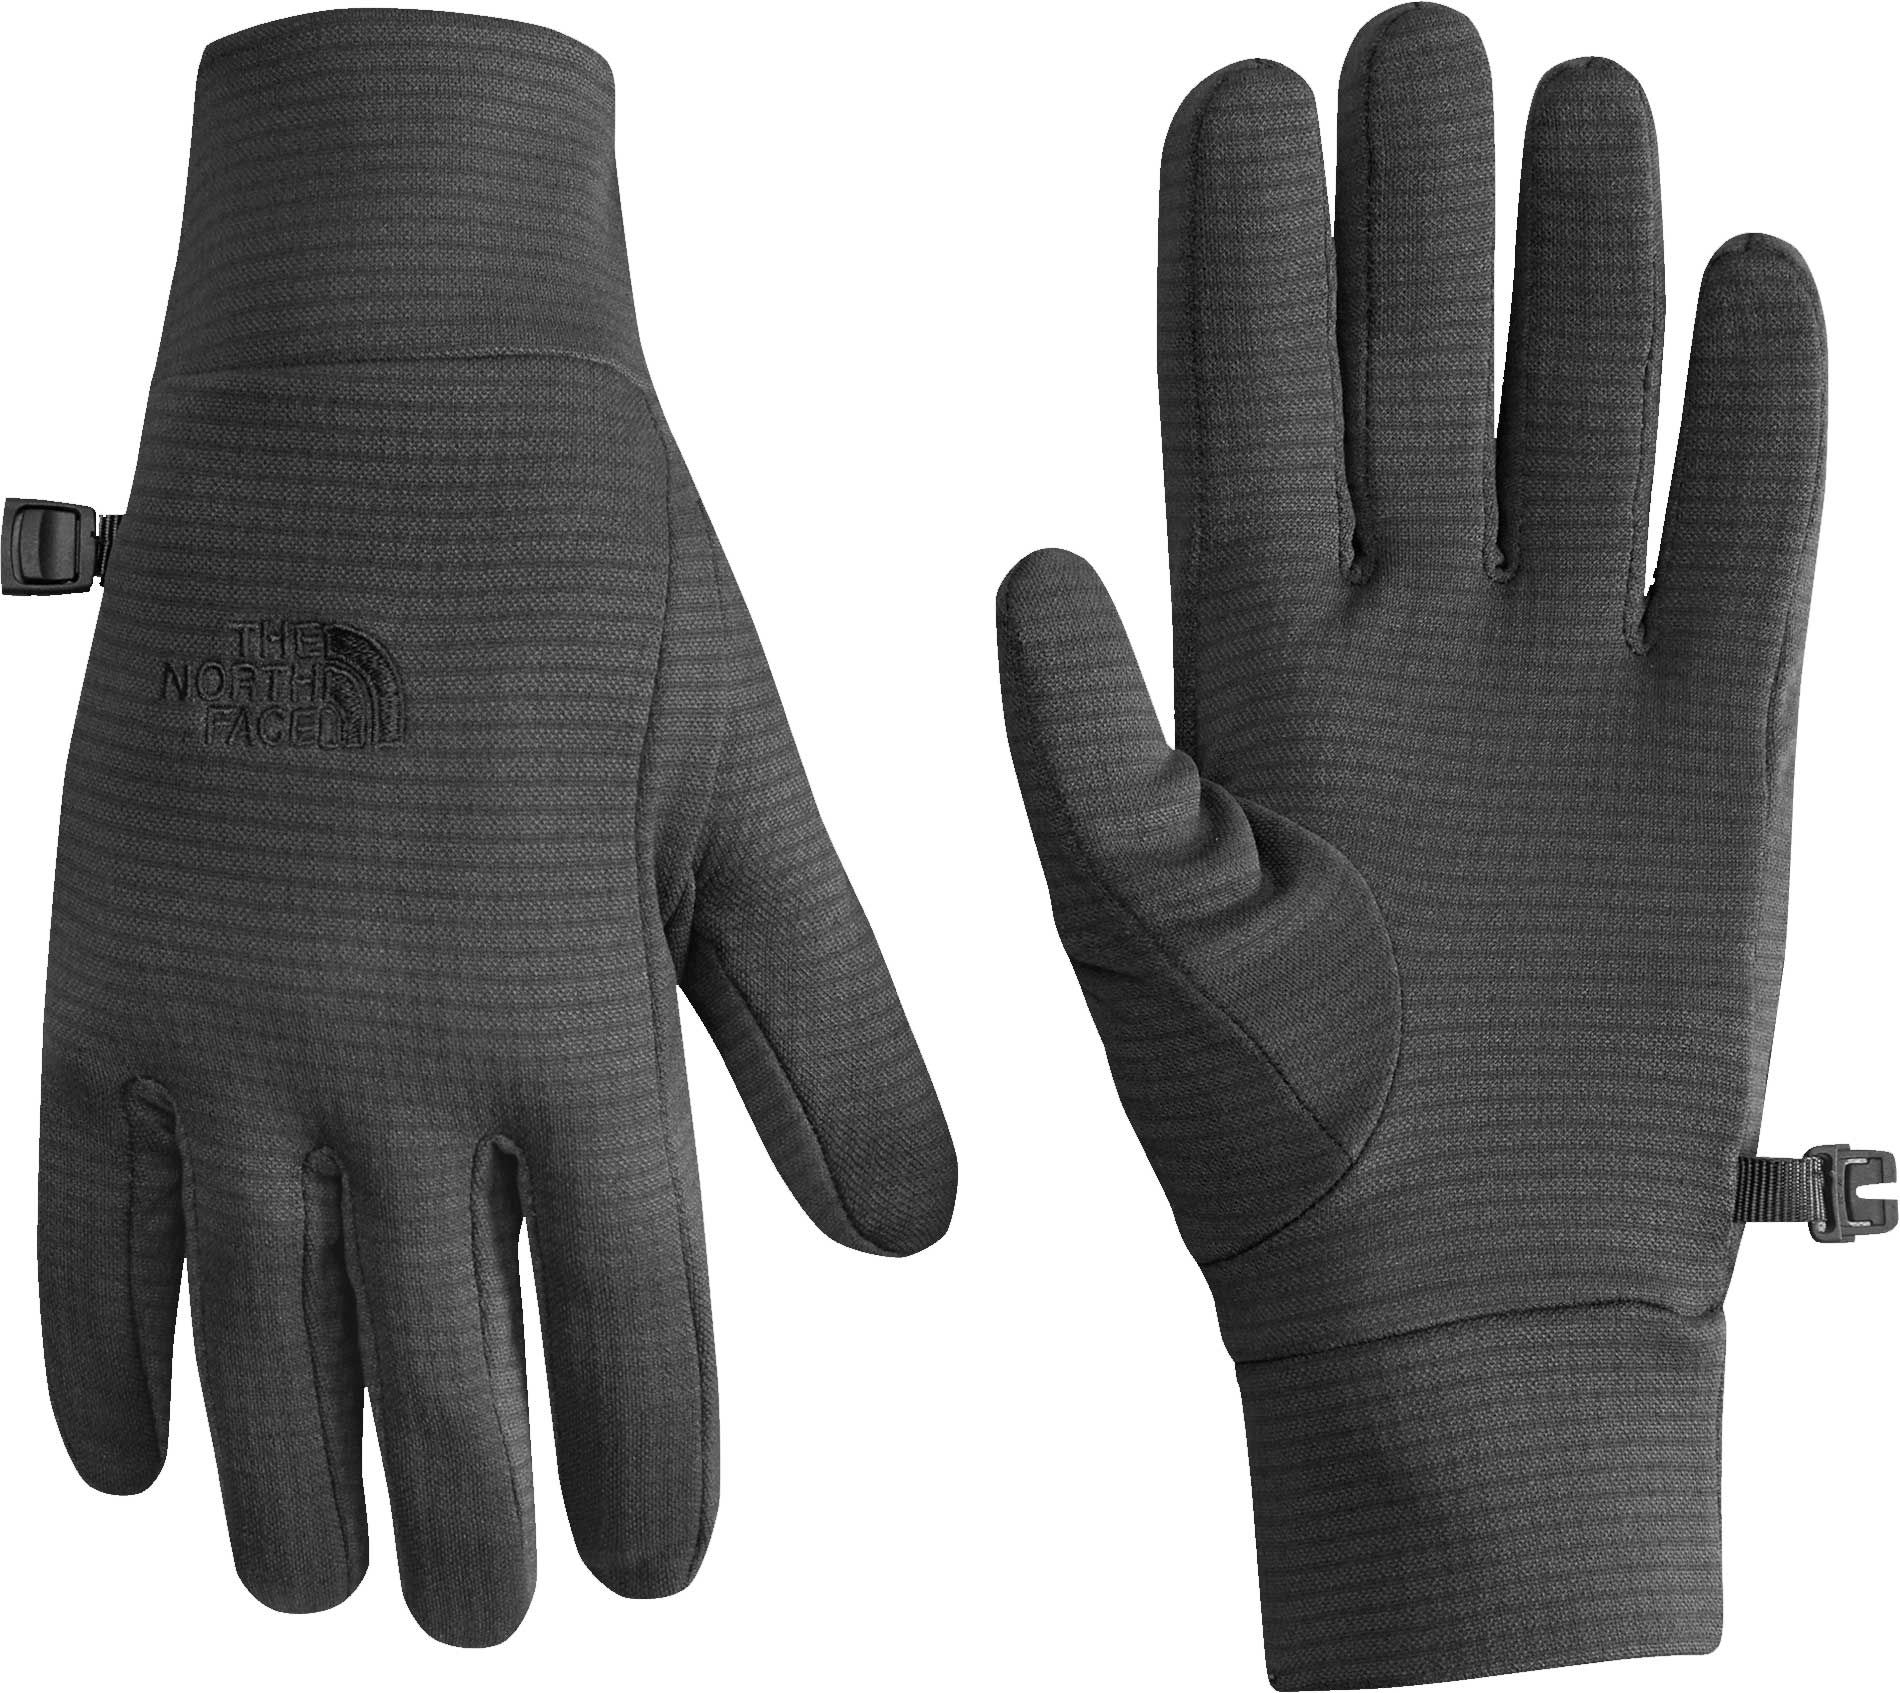 the north face flashdry glove liners